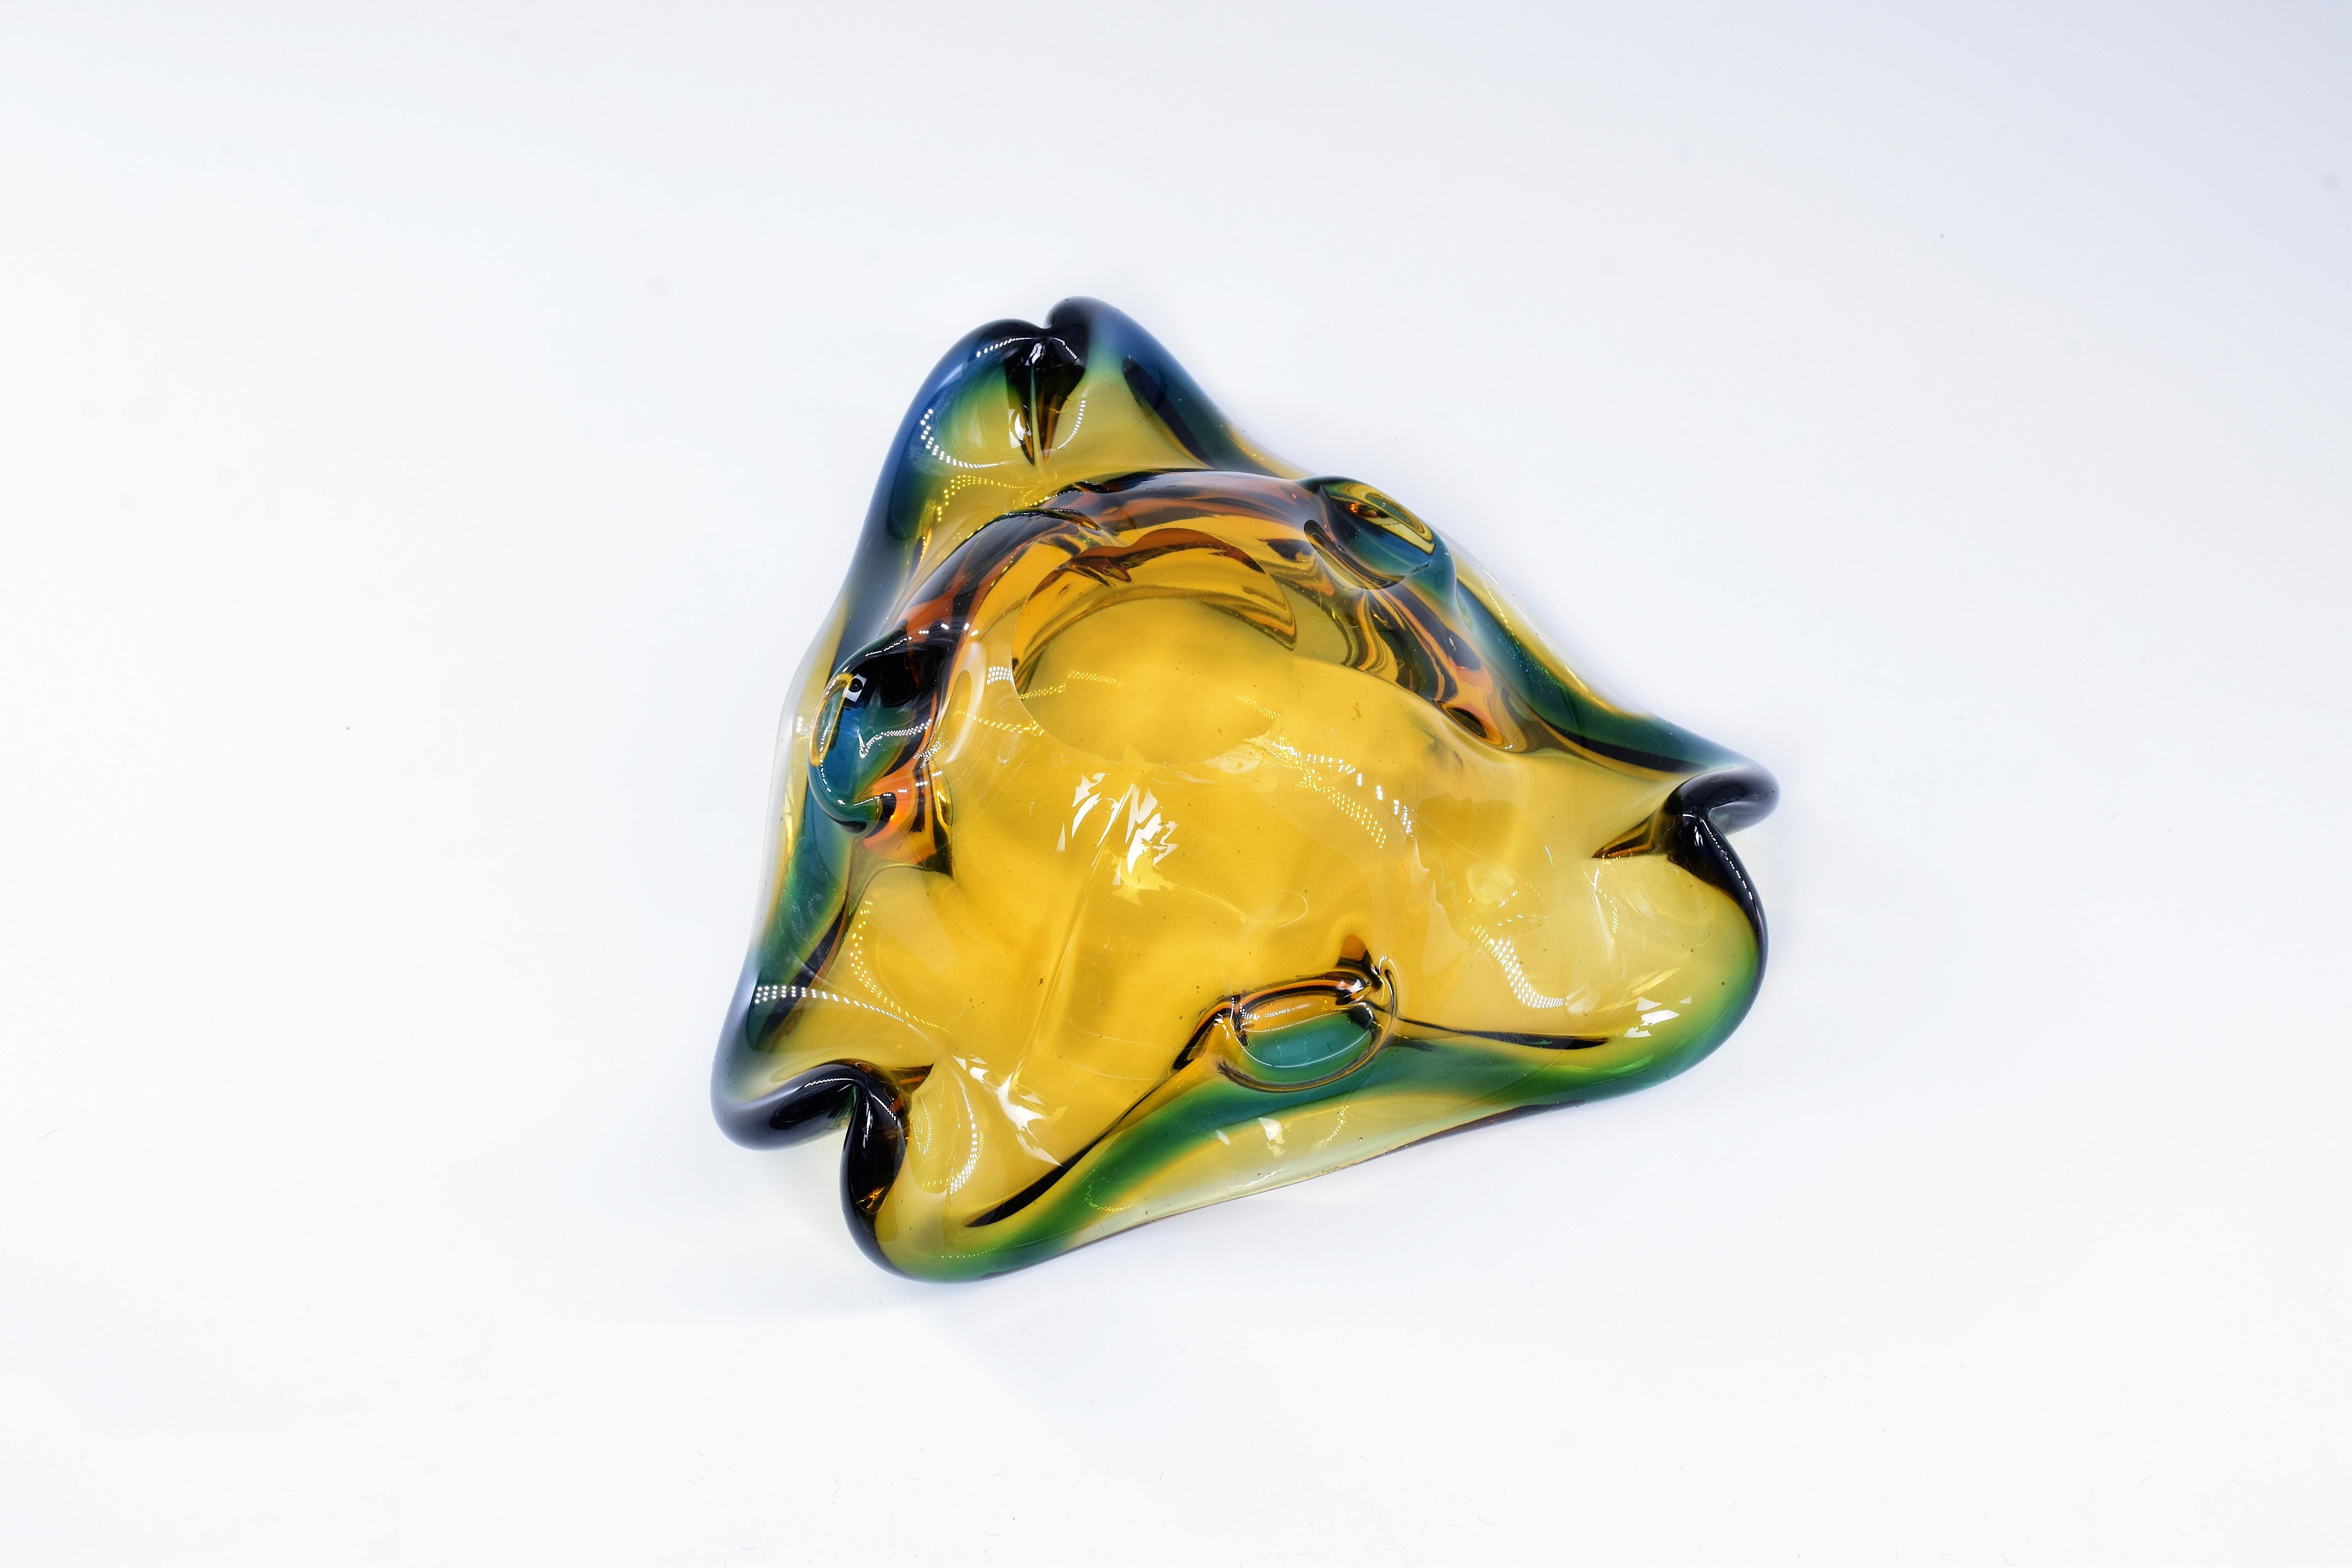 Mid-Century Modern 1970s Italian Murano Sommerso Glass Bowl in Green and Yellow